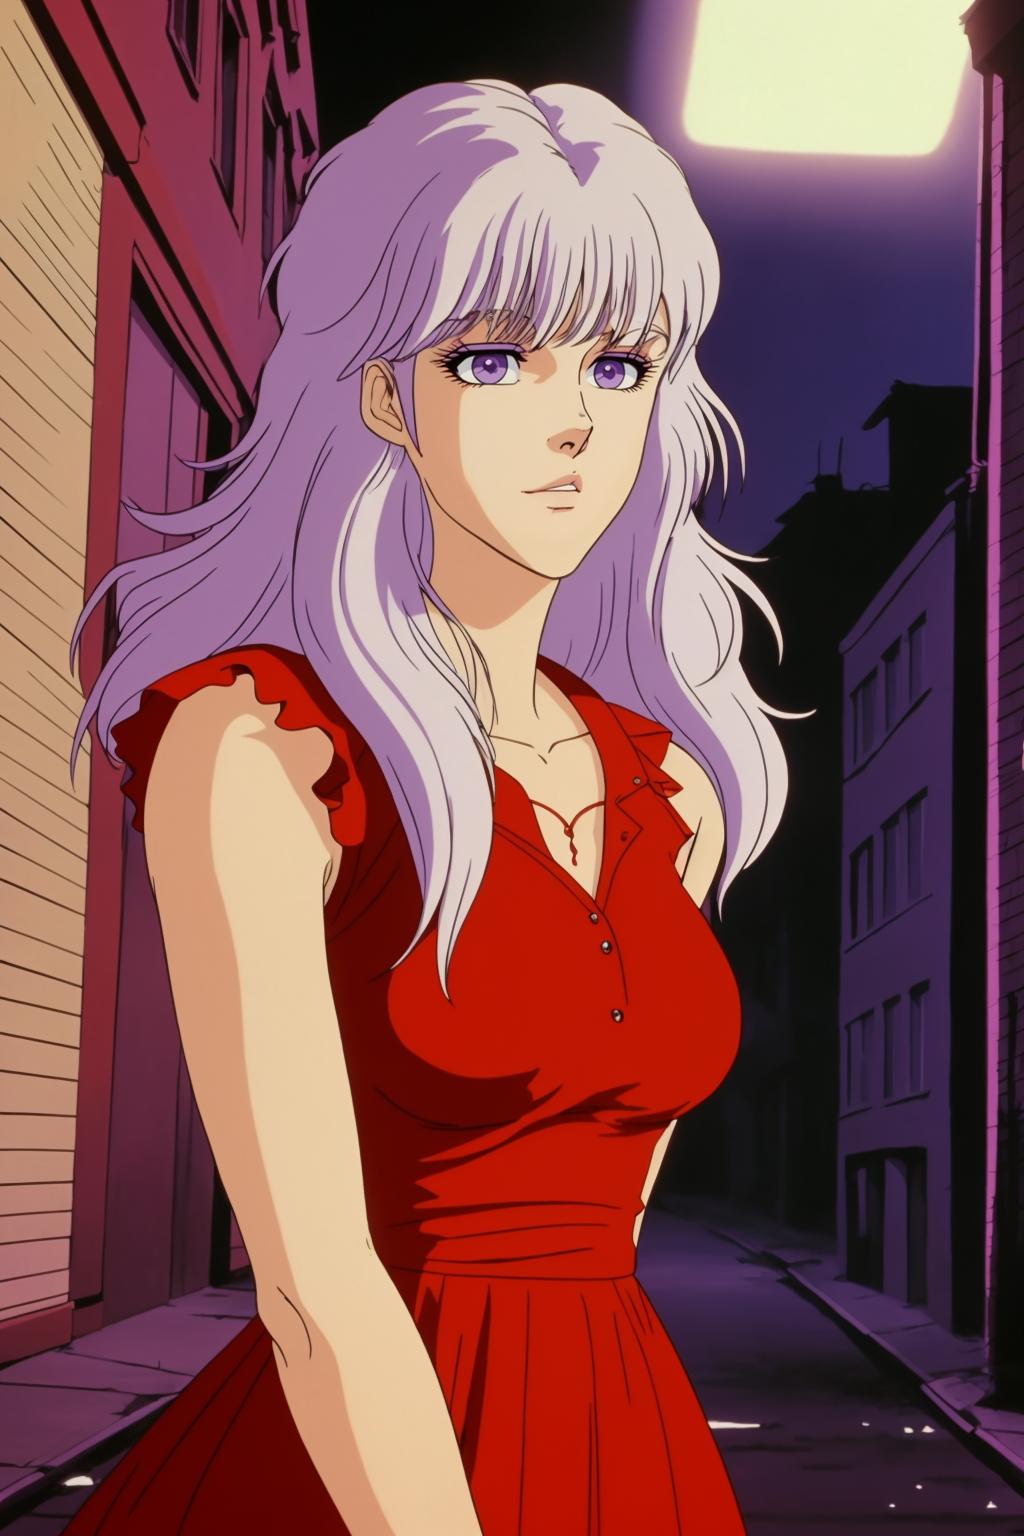 Bring Back 80s Anime Hair on Twitter PRISS amp THE REPILICANTS  httpstcomfoIPOKtQJ  Twitter